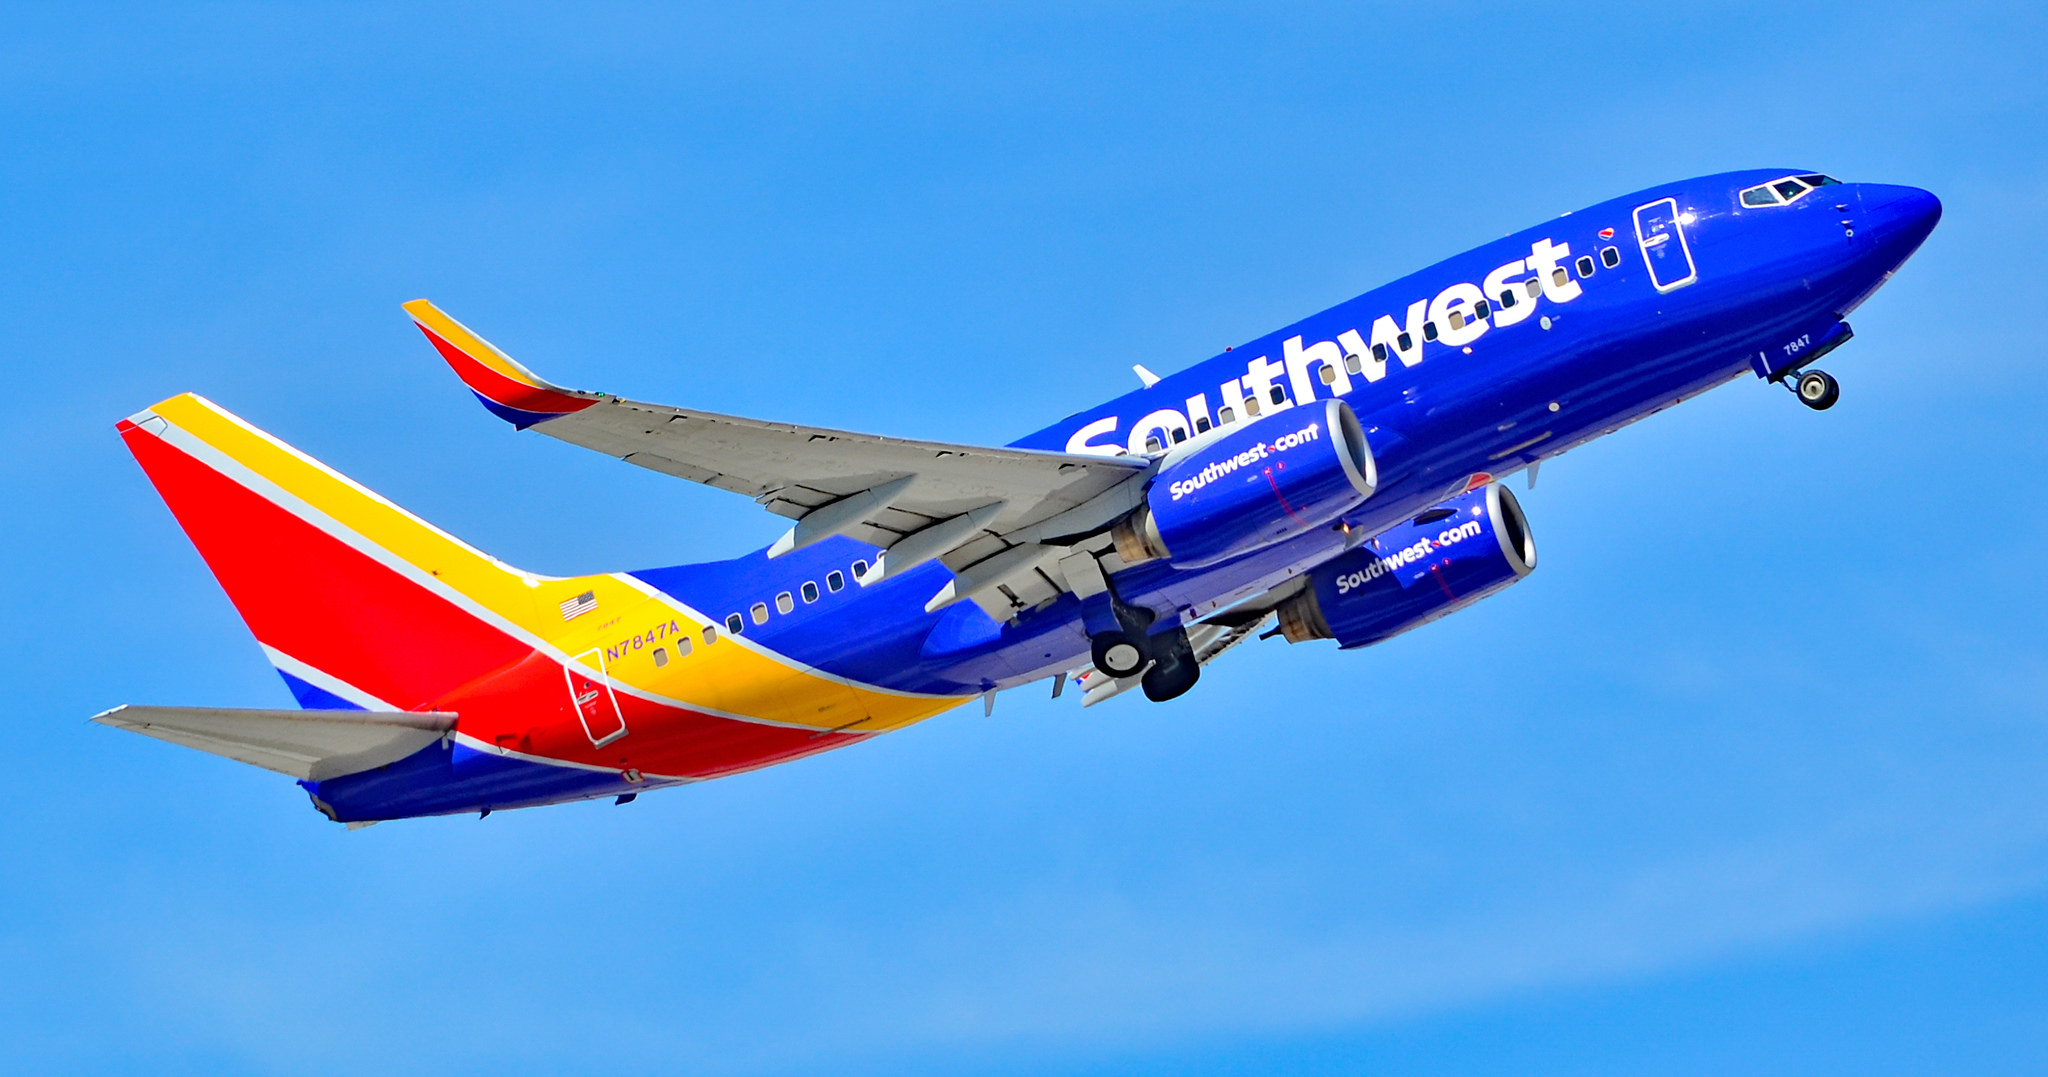 Southwest Grounds Planes To Check For Engine Problems | Texas Standard